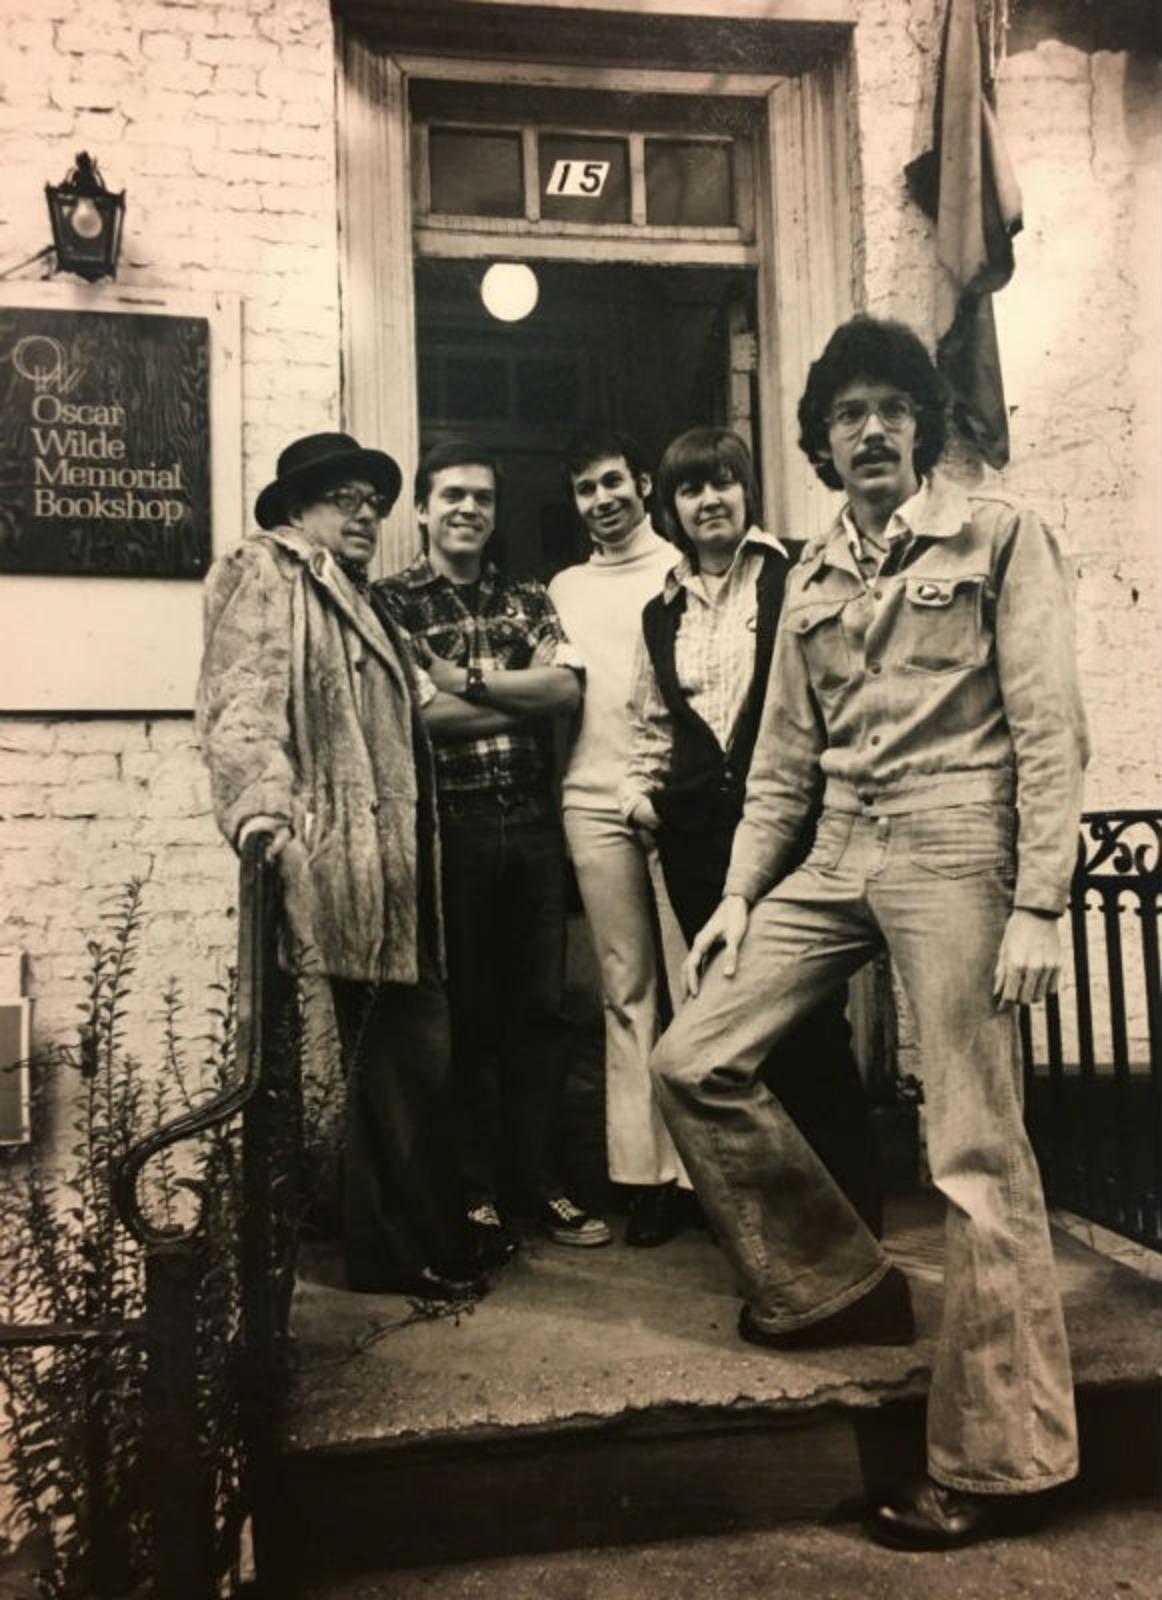 Photograph of Craig Rodwell, Tennessee Williams, and staff of Oscar Wilde Memorial Bookshop